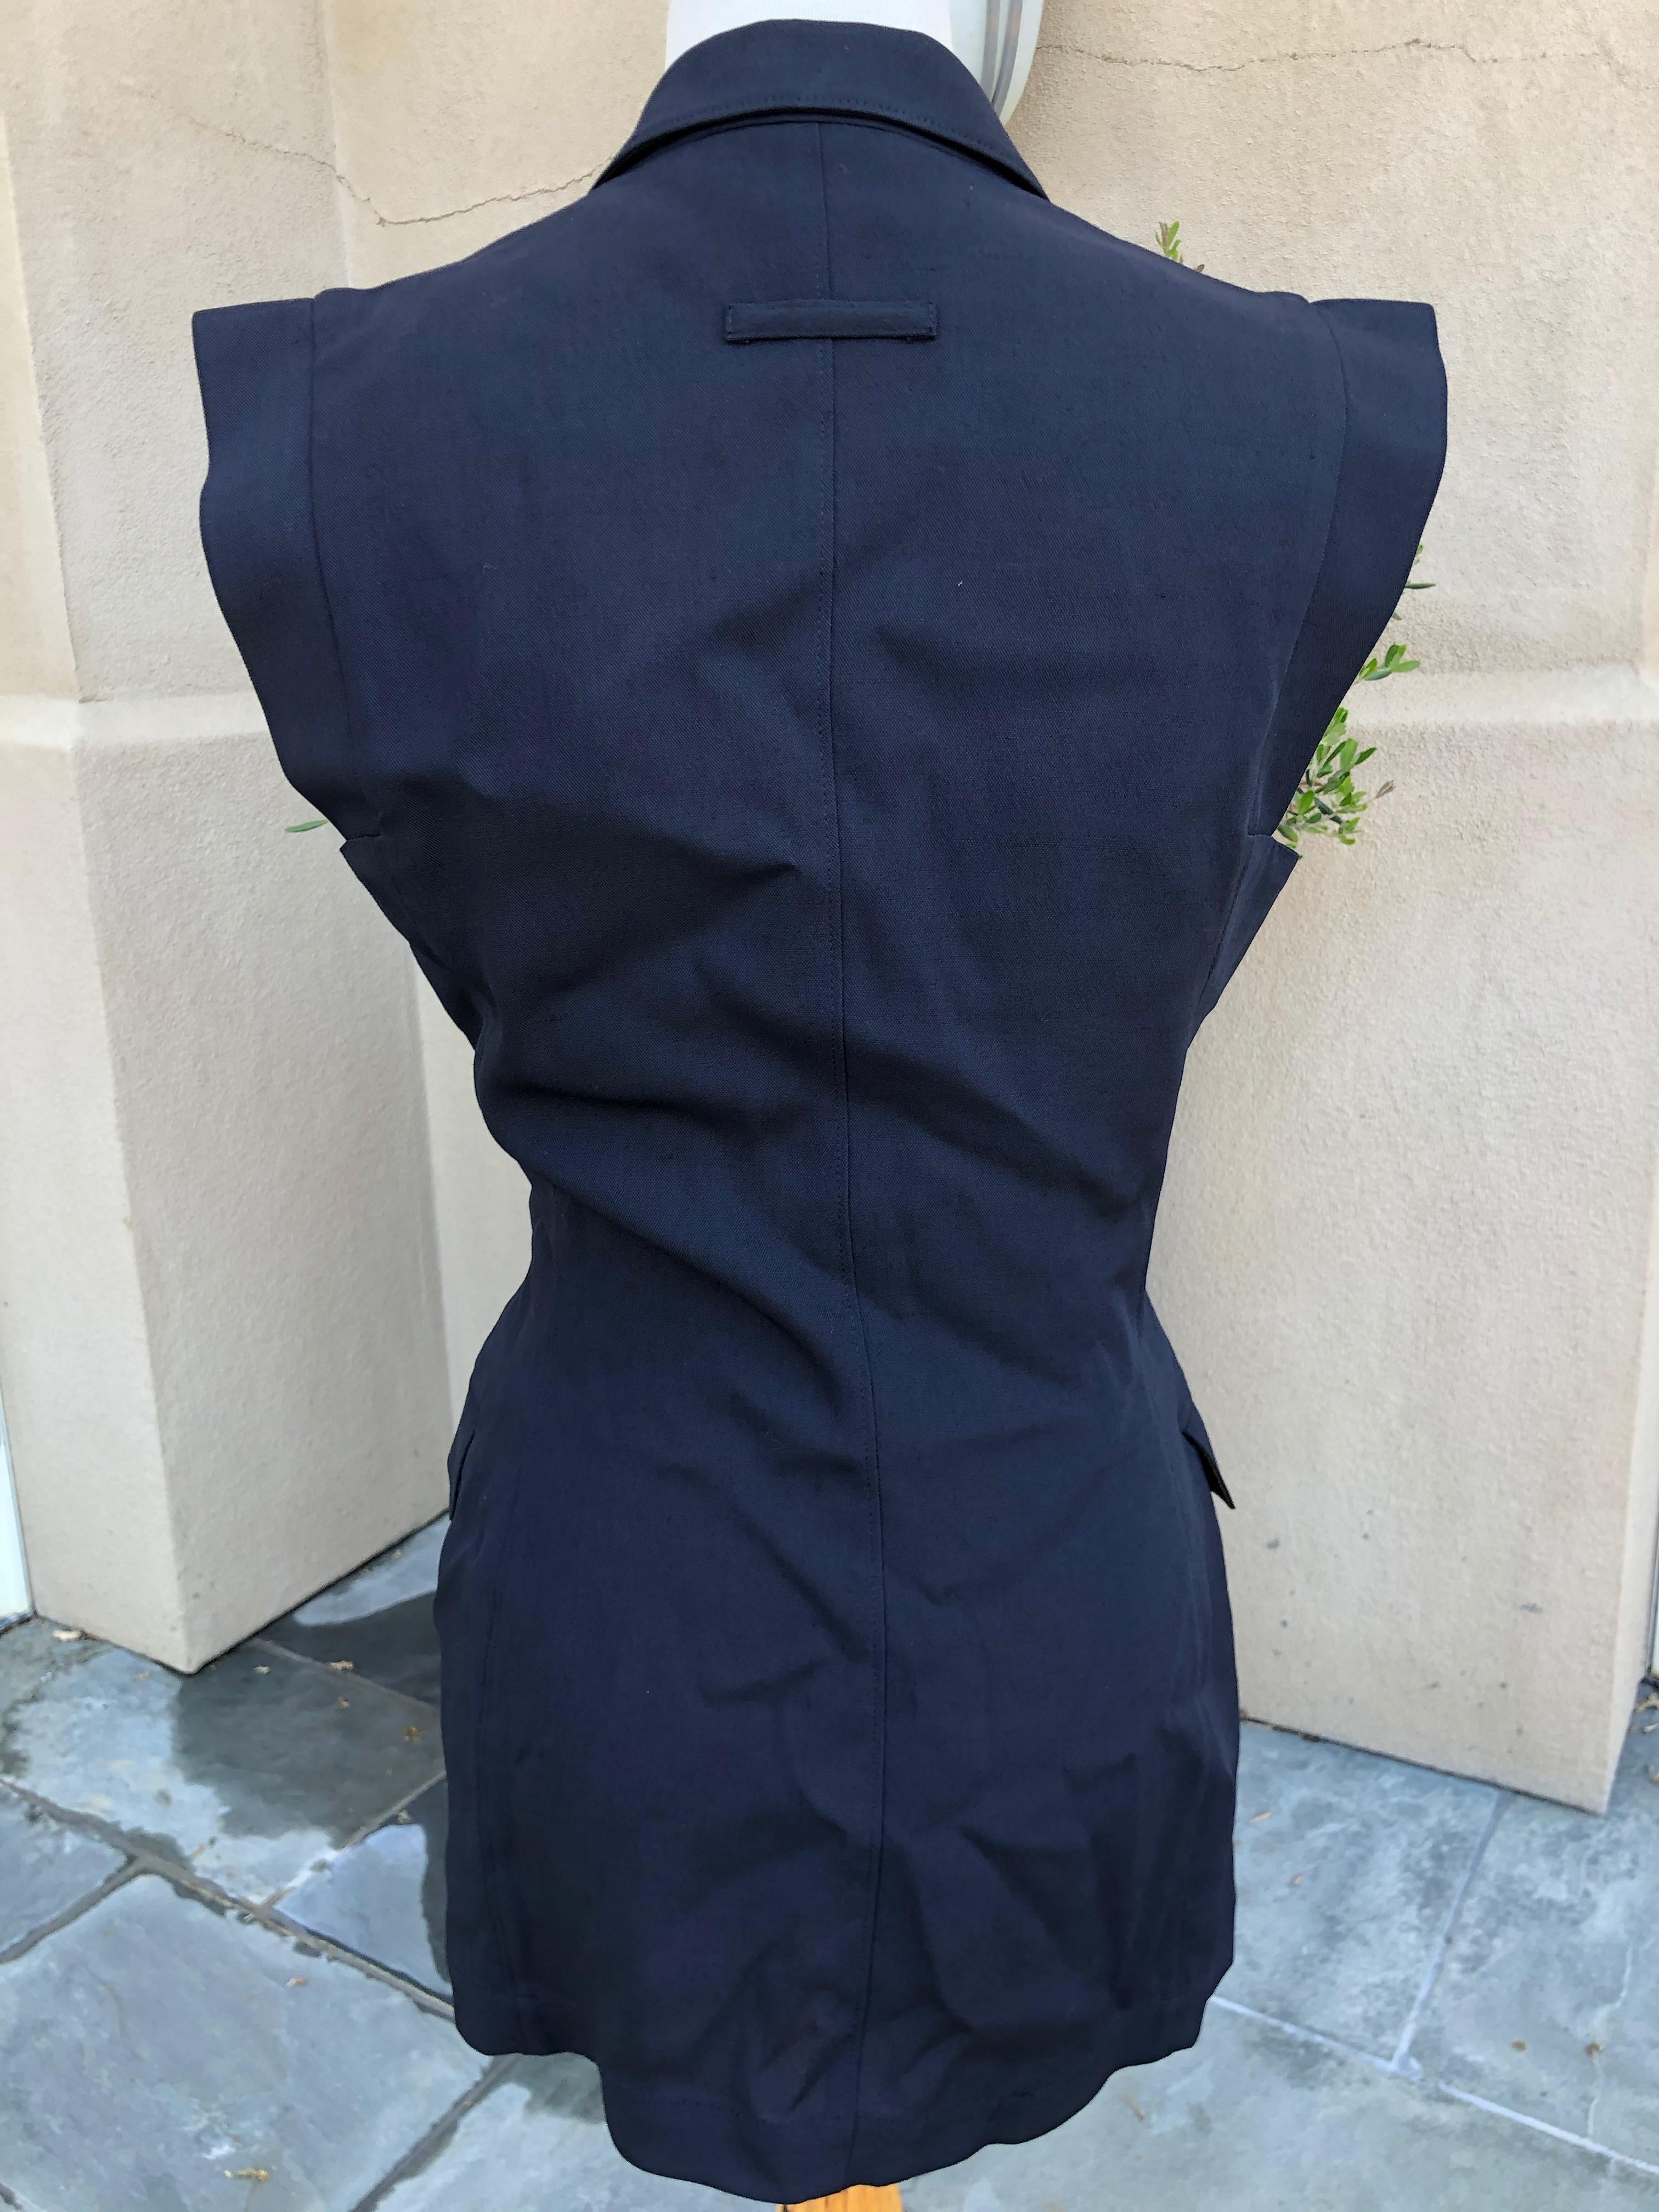 Jean Paul Gaultier 1980's Sleeveless Tuxedo Jacket  In Excellent Condition For Sale In Cloverdale, CA